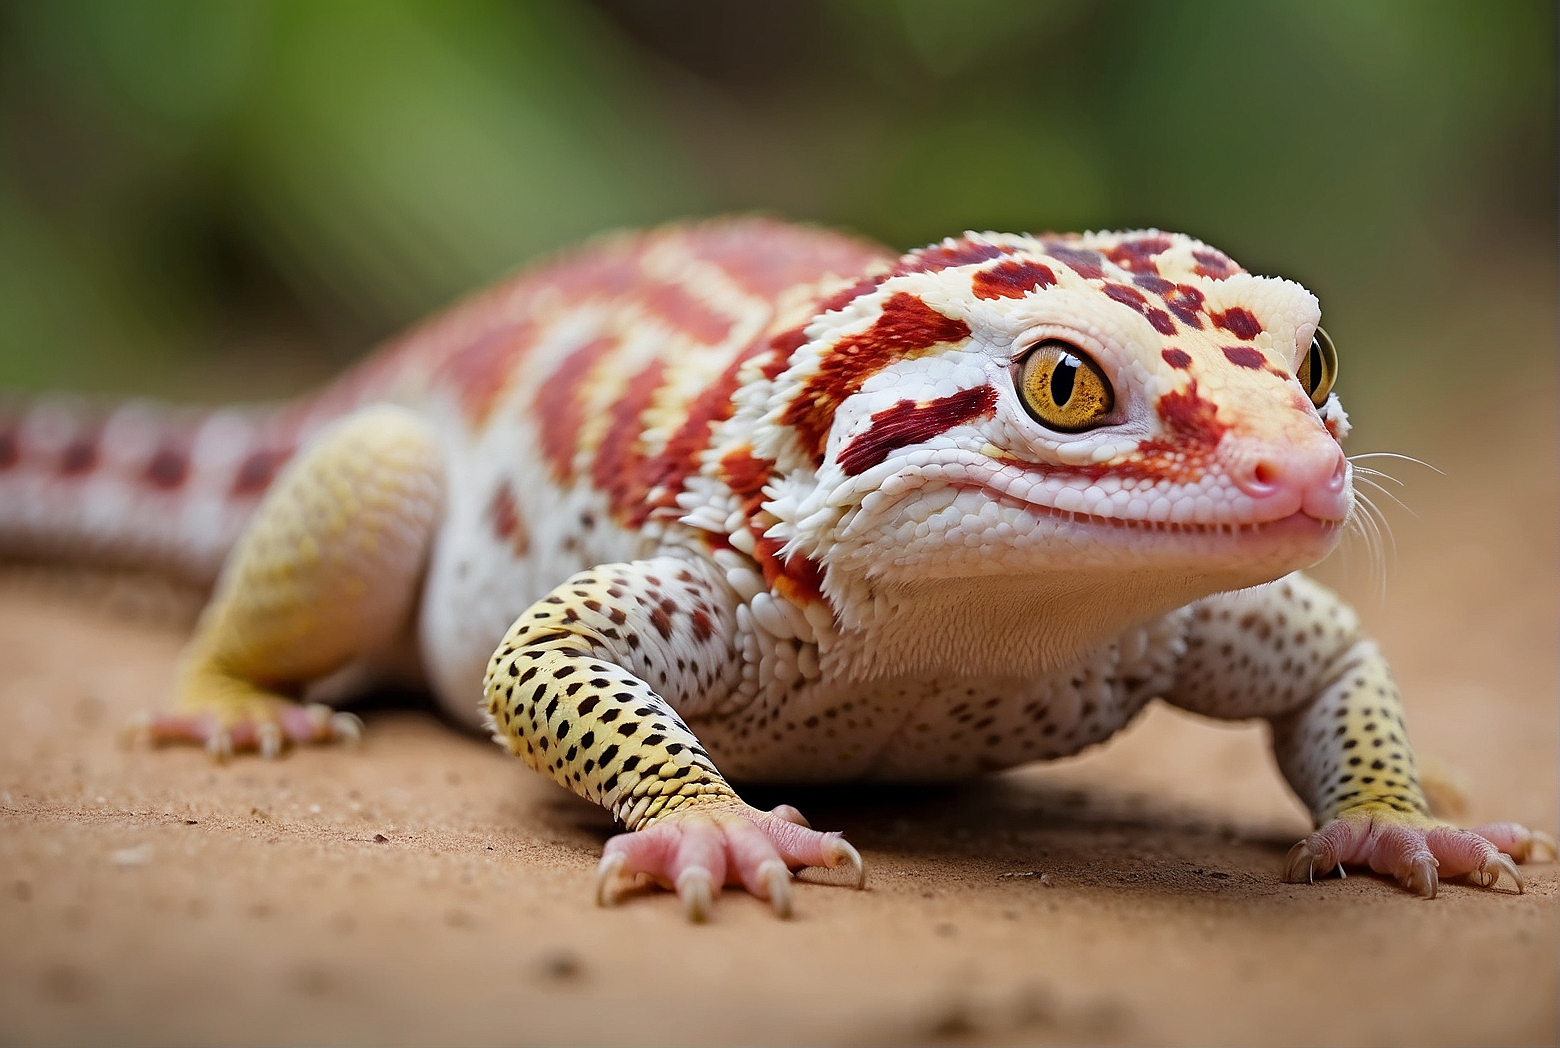 Can You Get Sick From A Leopard Gecko?